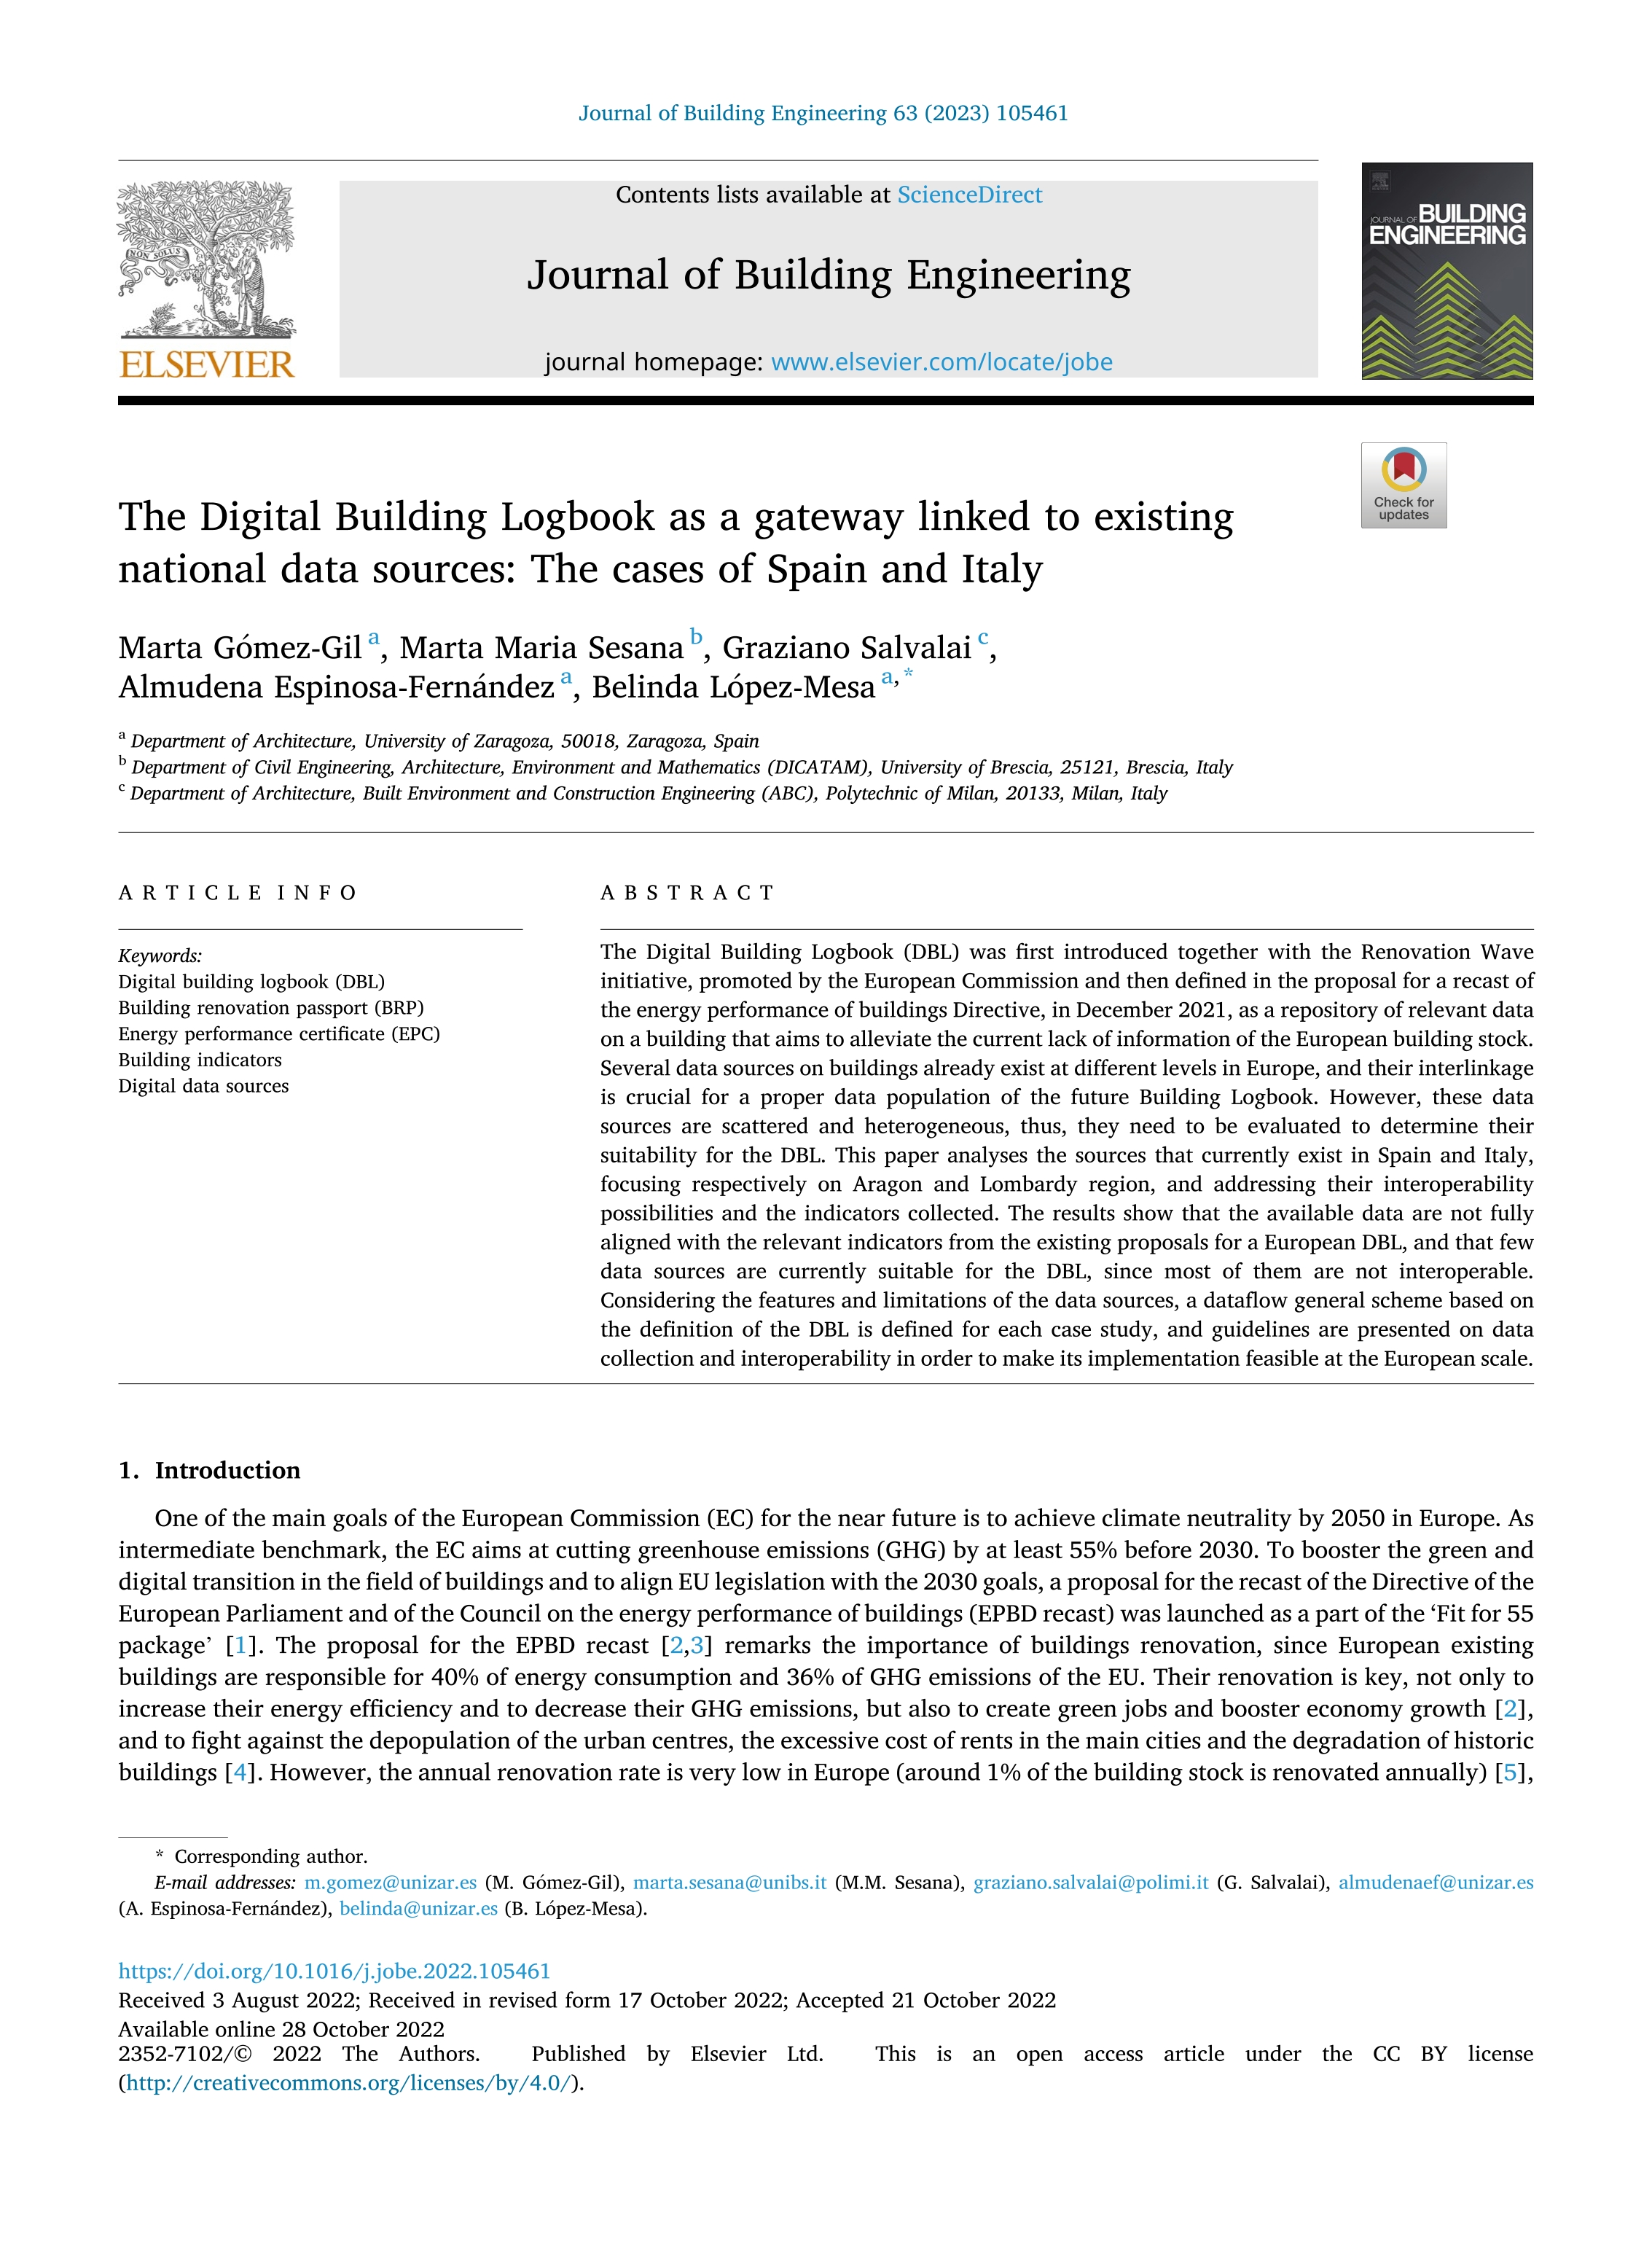 The digital building logbook as a gateway linked to existing national data sources: The cases of Spain and Italy